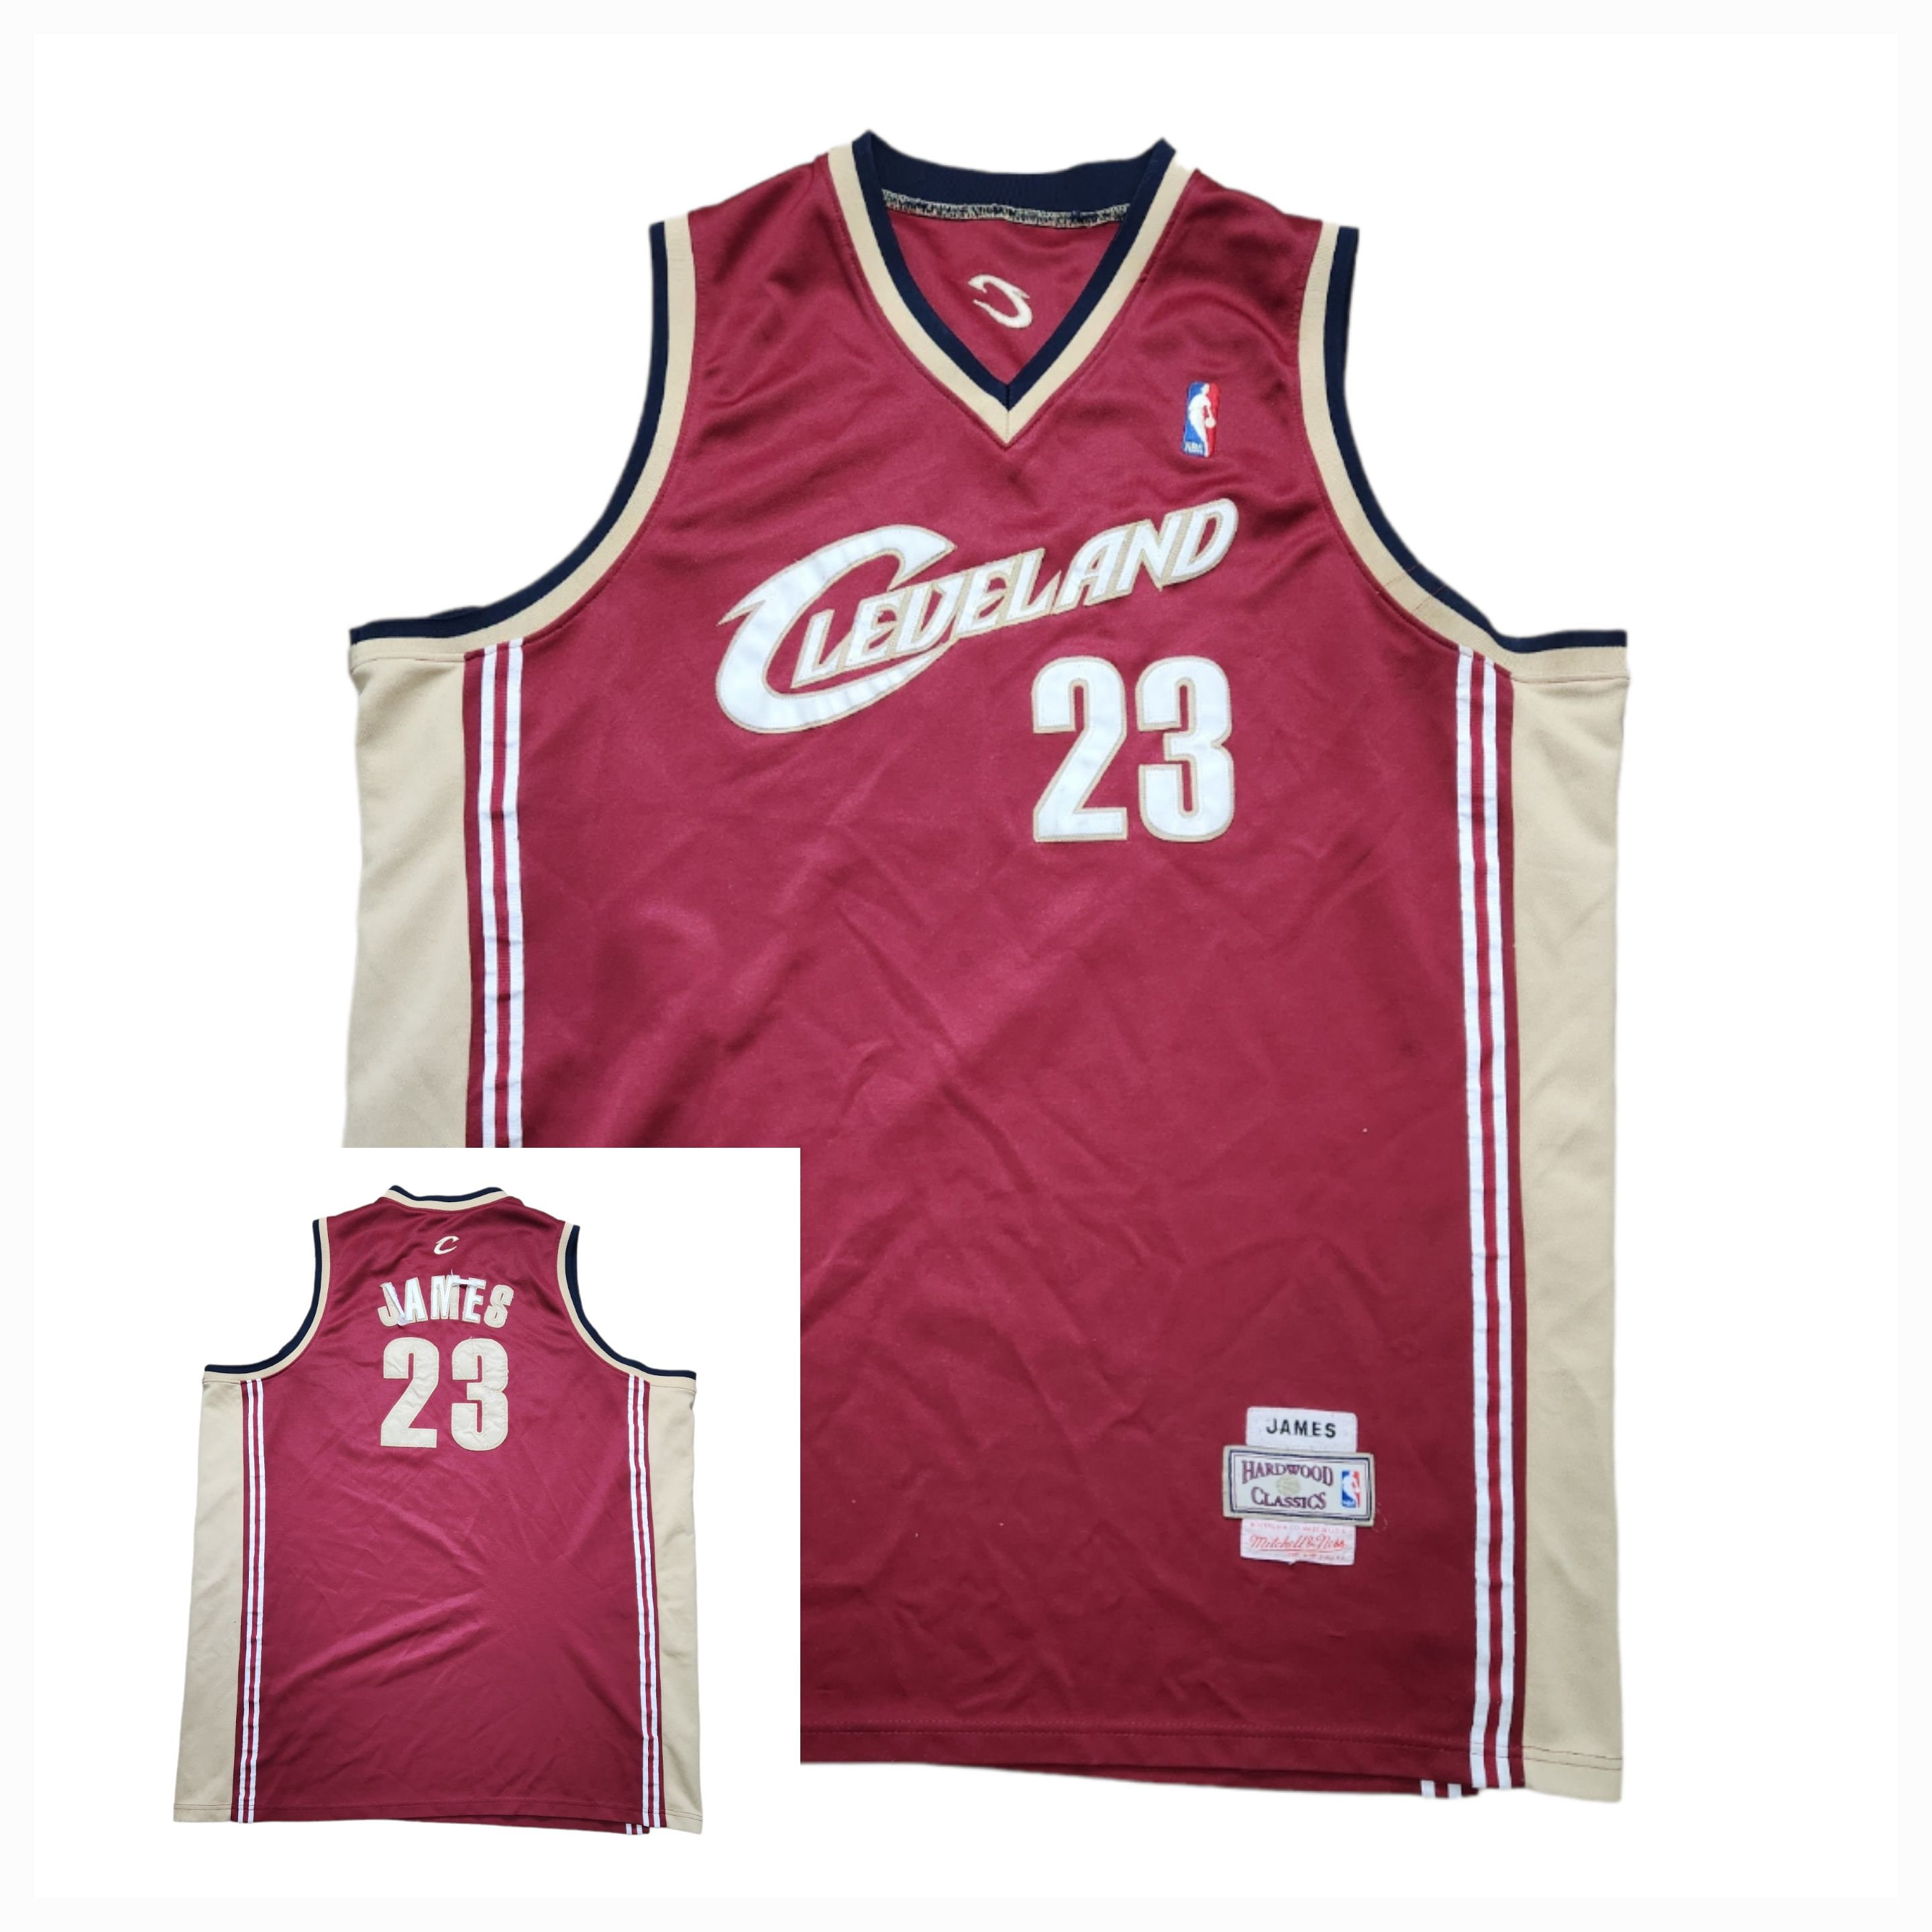 2003-2004 Mitchell & Ness LEBRON JAMES #23 Cleveland Cavaliers Jersey  Large 44 L